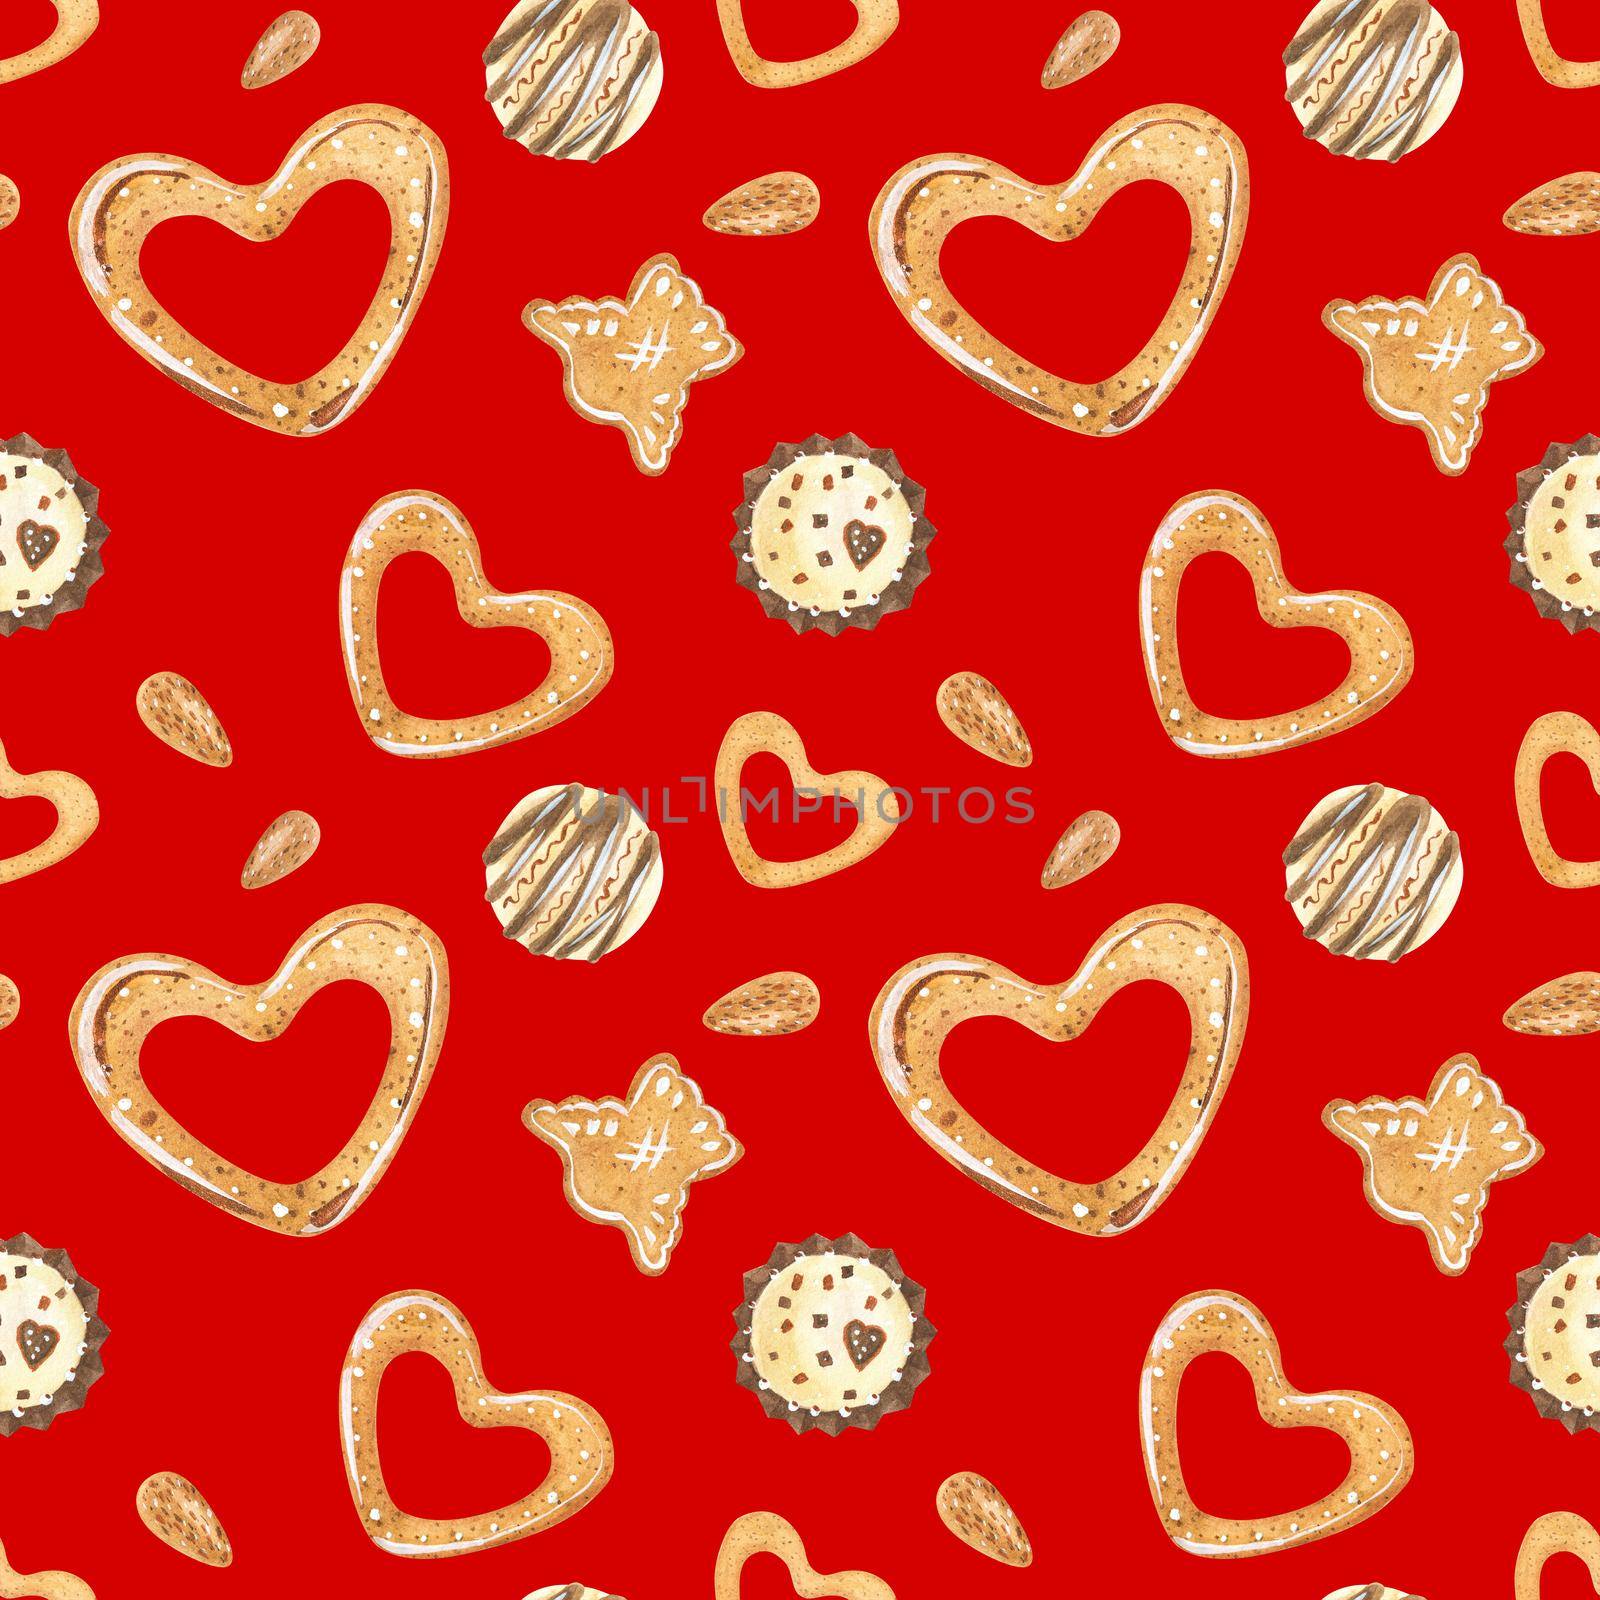 Sweet winter seamless pattern with chocolate candies and cookies. Watercolor illustration for any event decoration, red background, path included